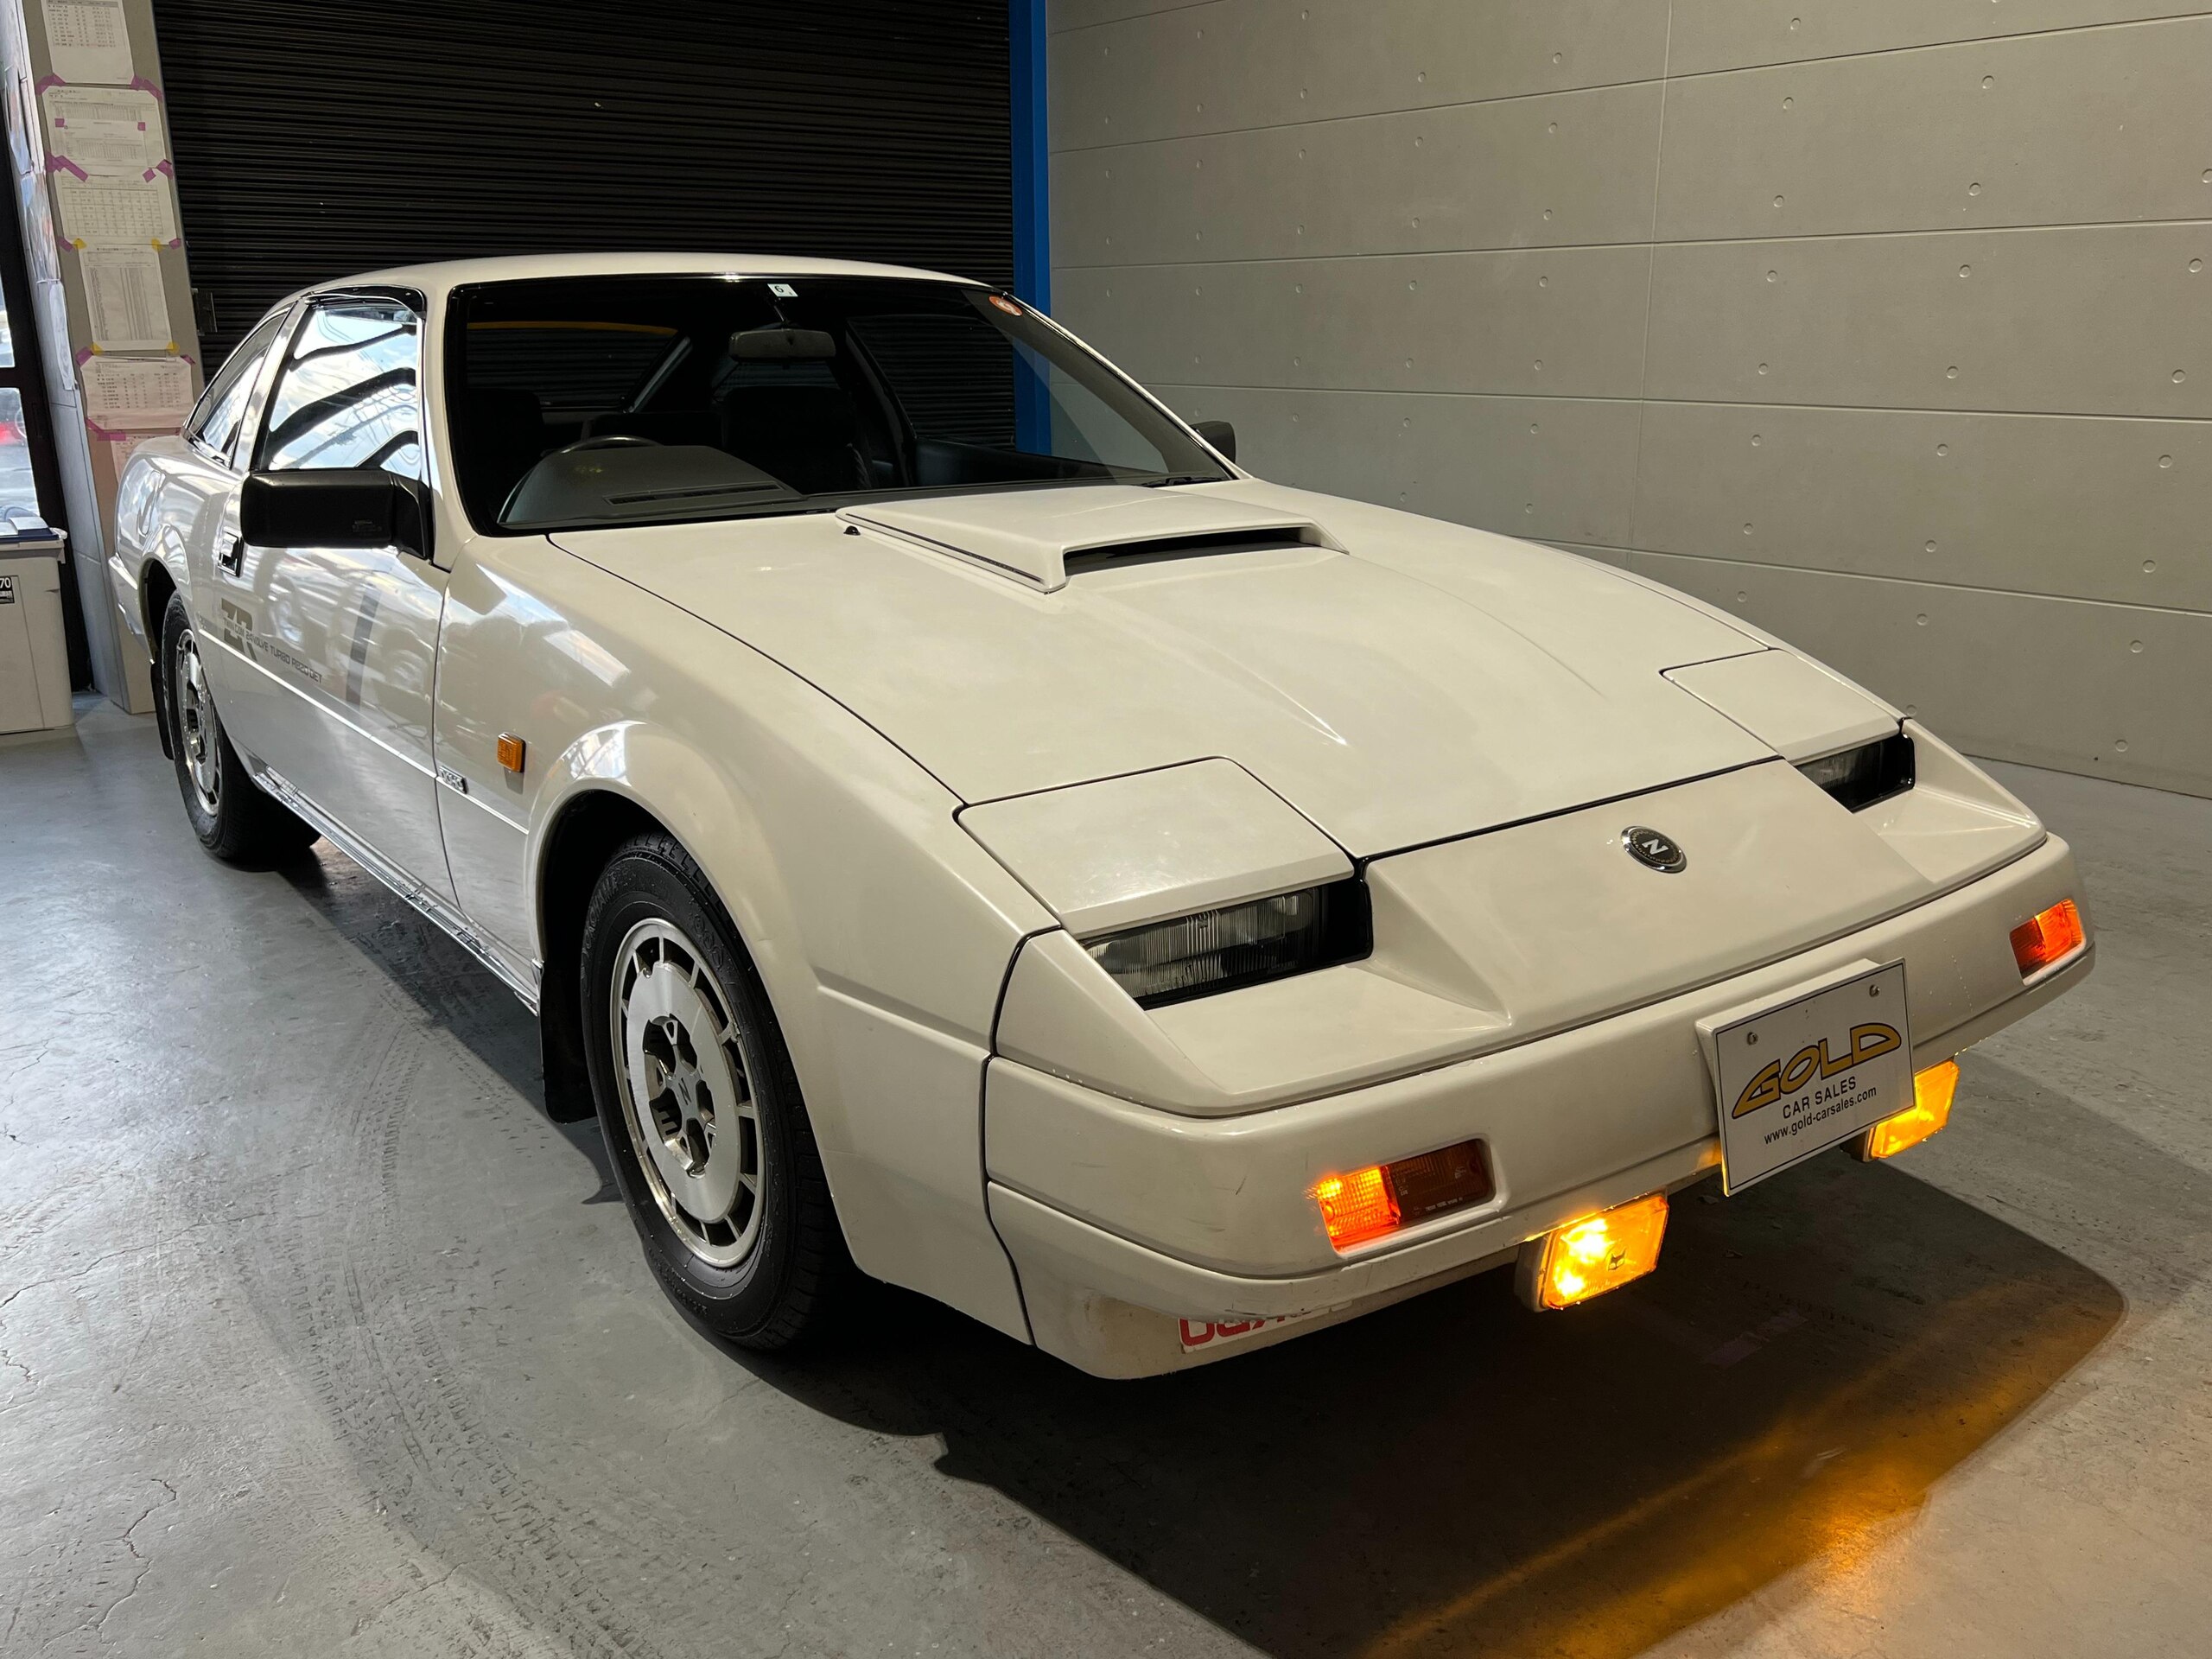 Used NISSAN FAIRLADY Z 1986 CFJ8073968 in good condition for 